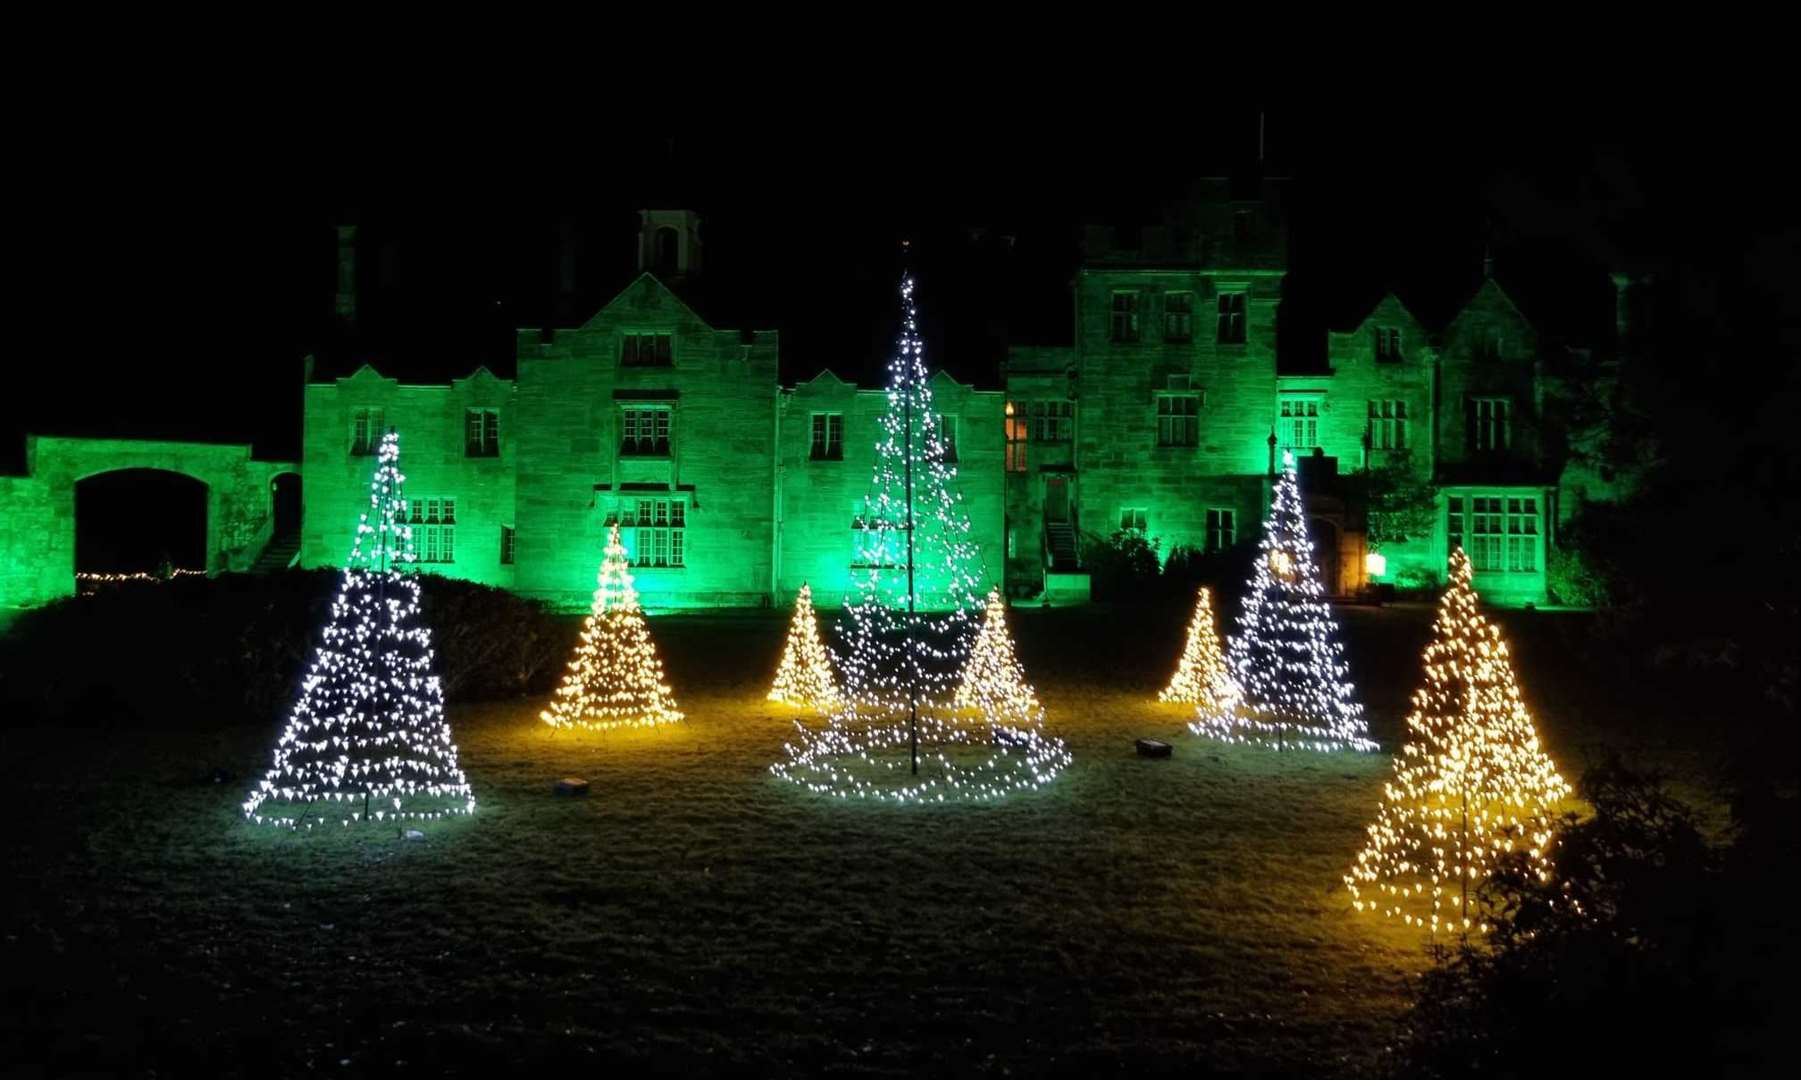 On some evenings during the Christmas period, Scotney Castle will be illuminated with sparkling festive lights. Picture: Laura Edwards